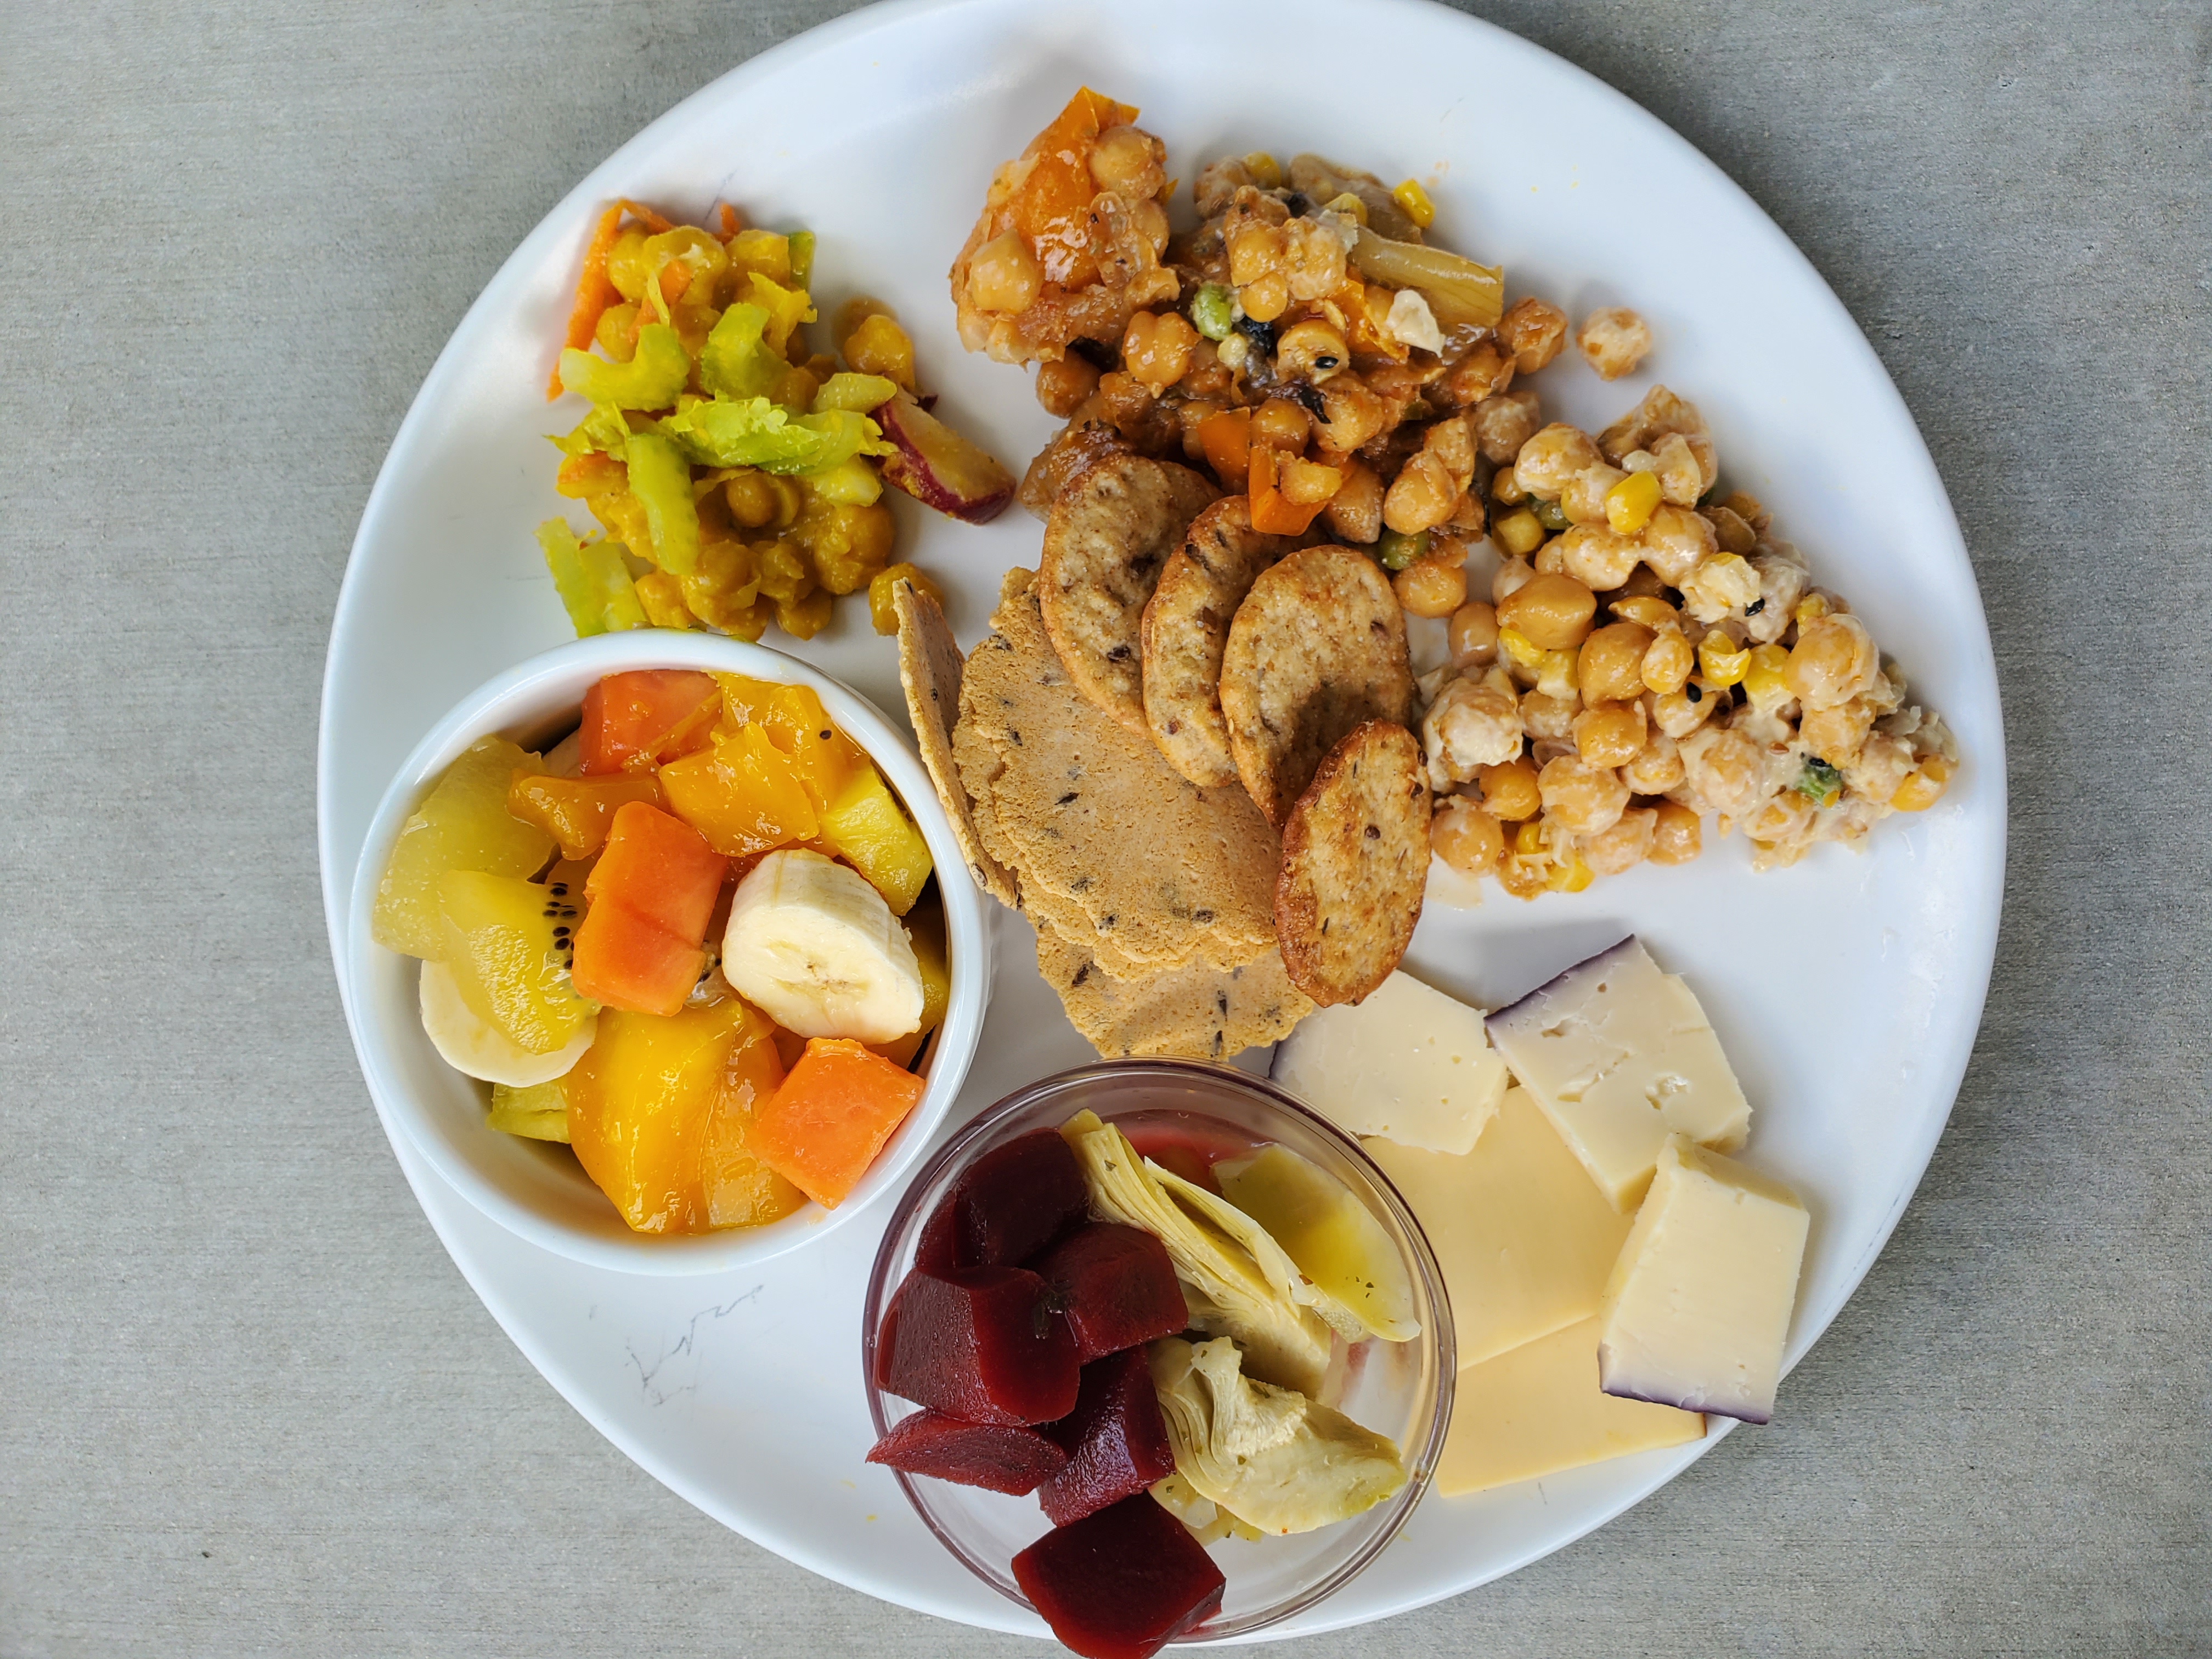 Plate of chickpea salads, fruit, marinated beets and artichokes, cheese, and fruit salad